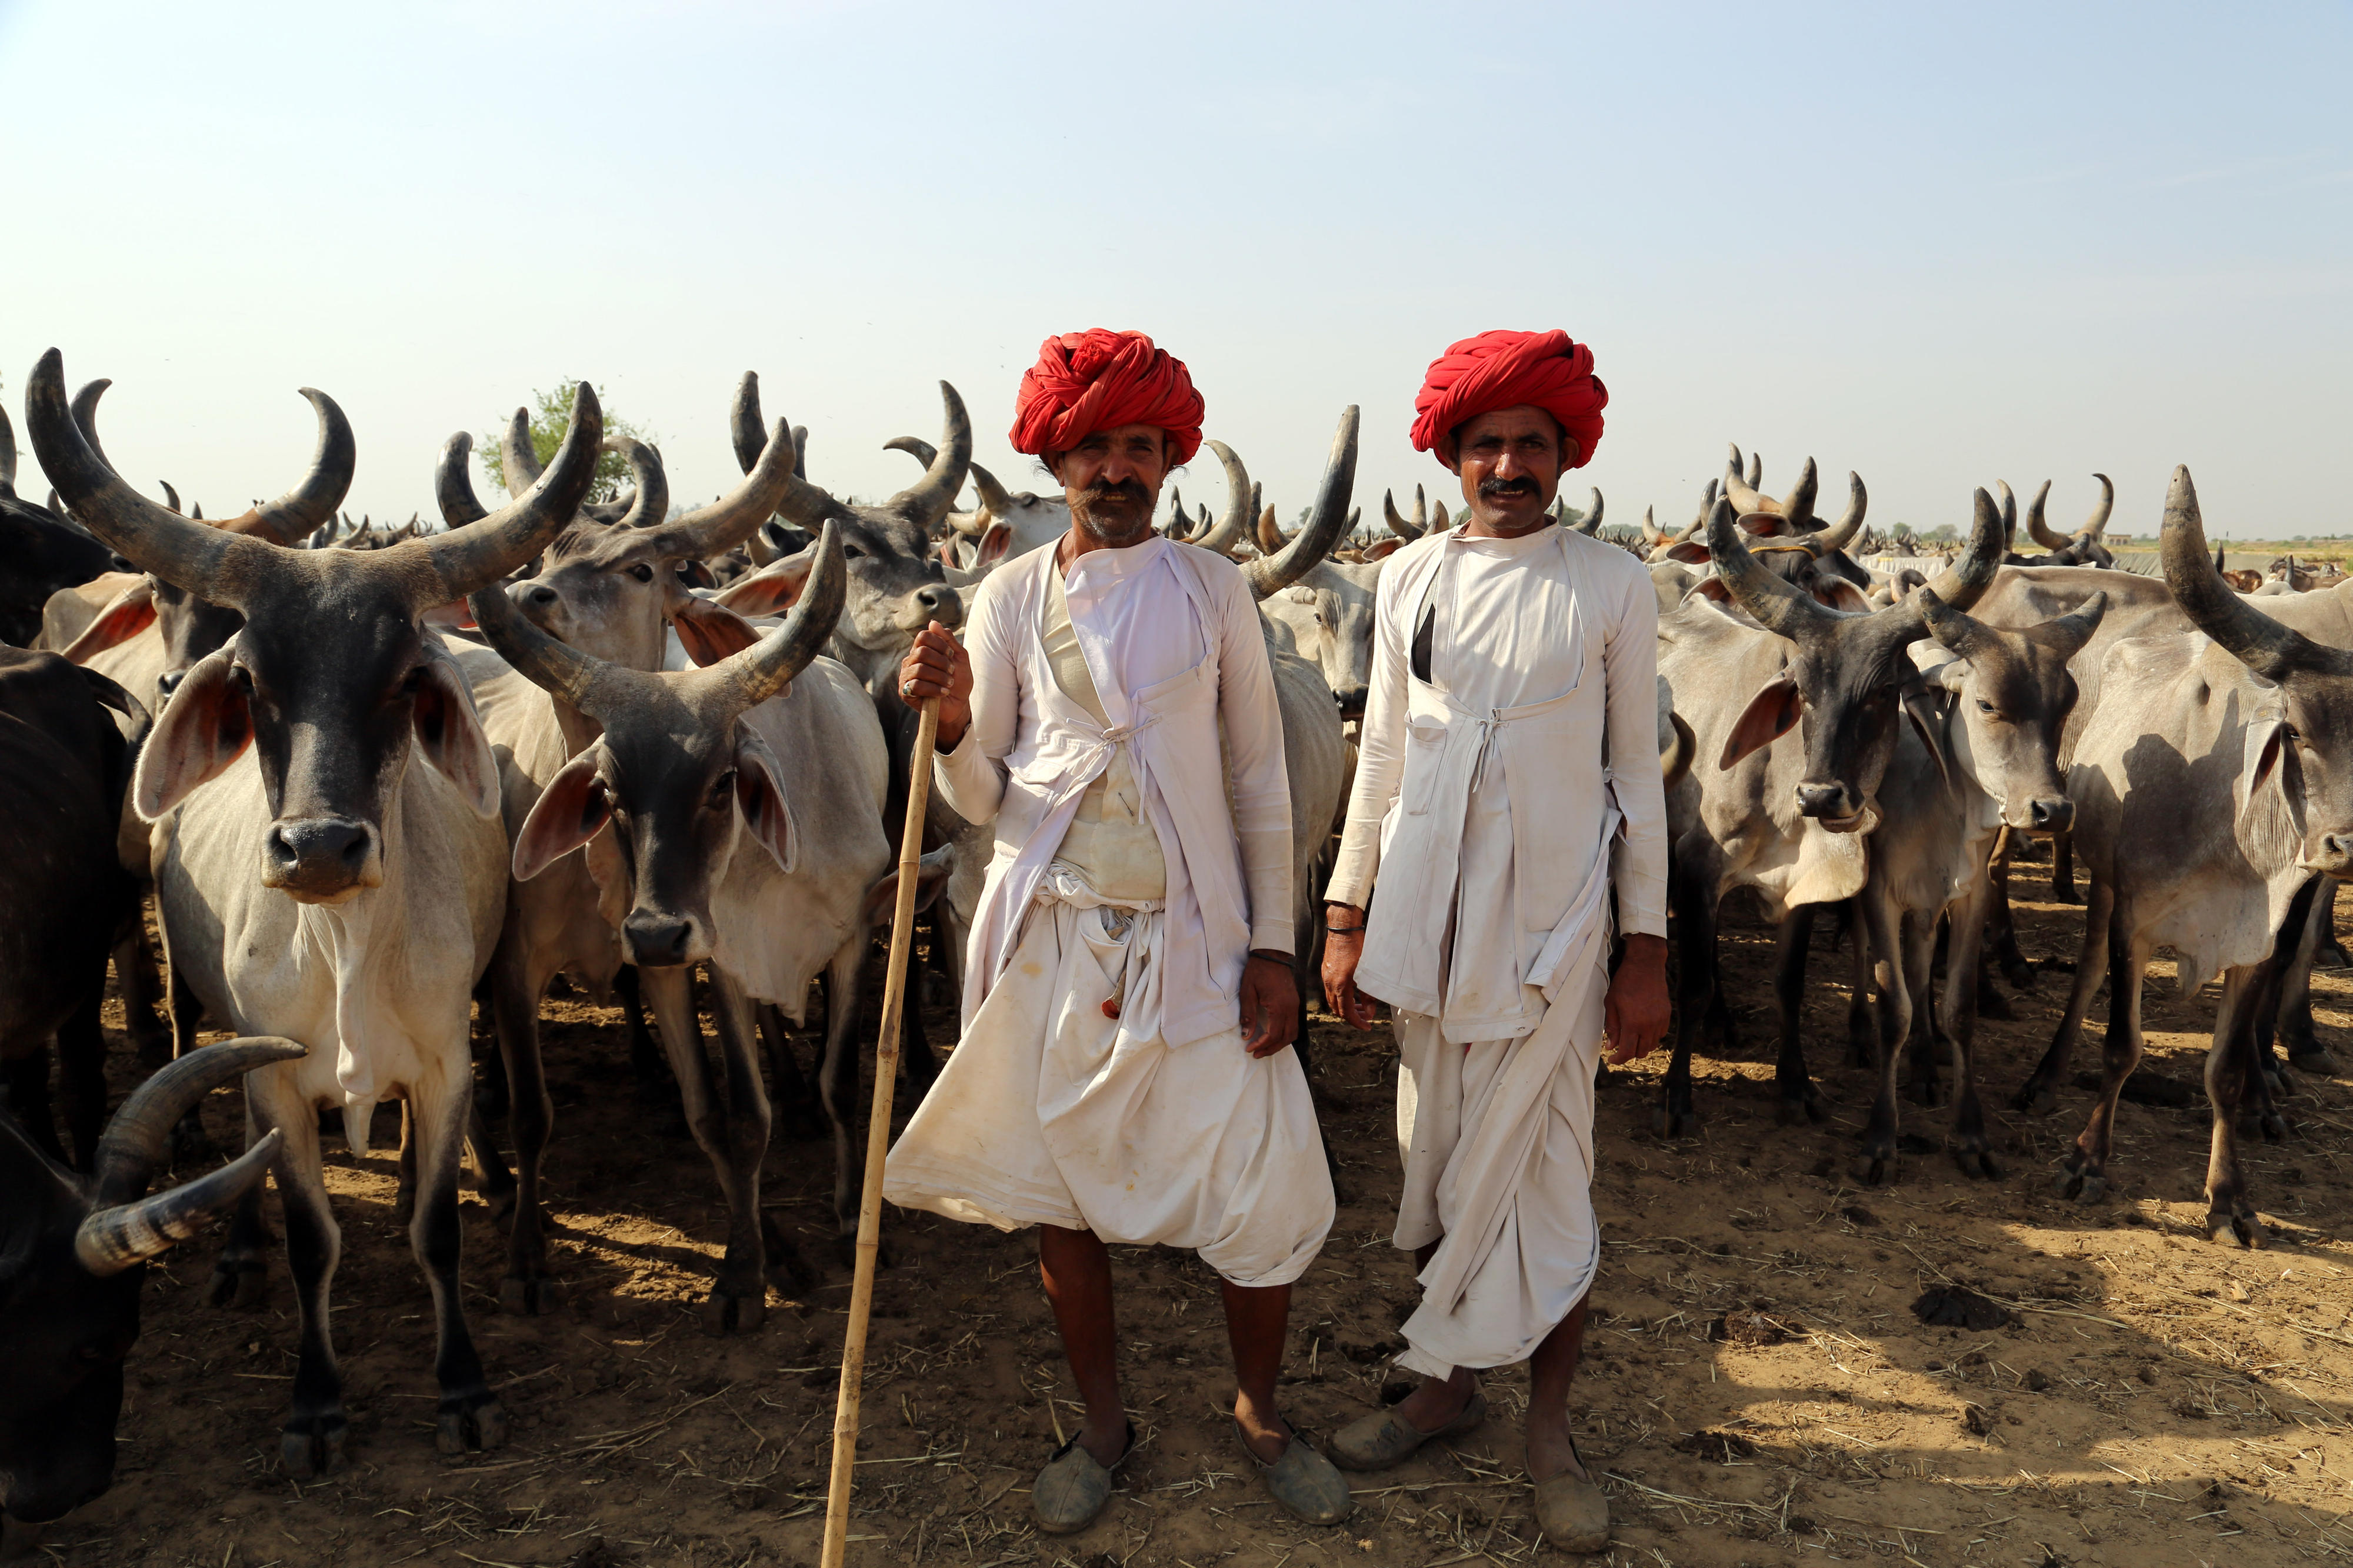 With scarce and erratic rainfall, and frequent droughts in the region, a pastoralist community of Rajasthan, Raikas follow the practice of moving their flocks and herds in search of water and forage.